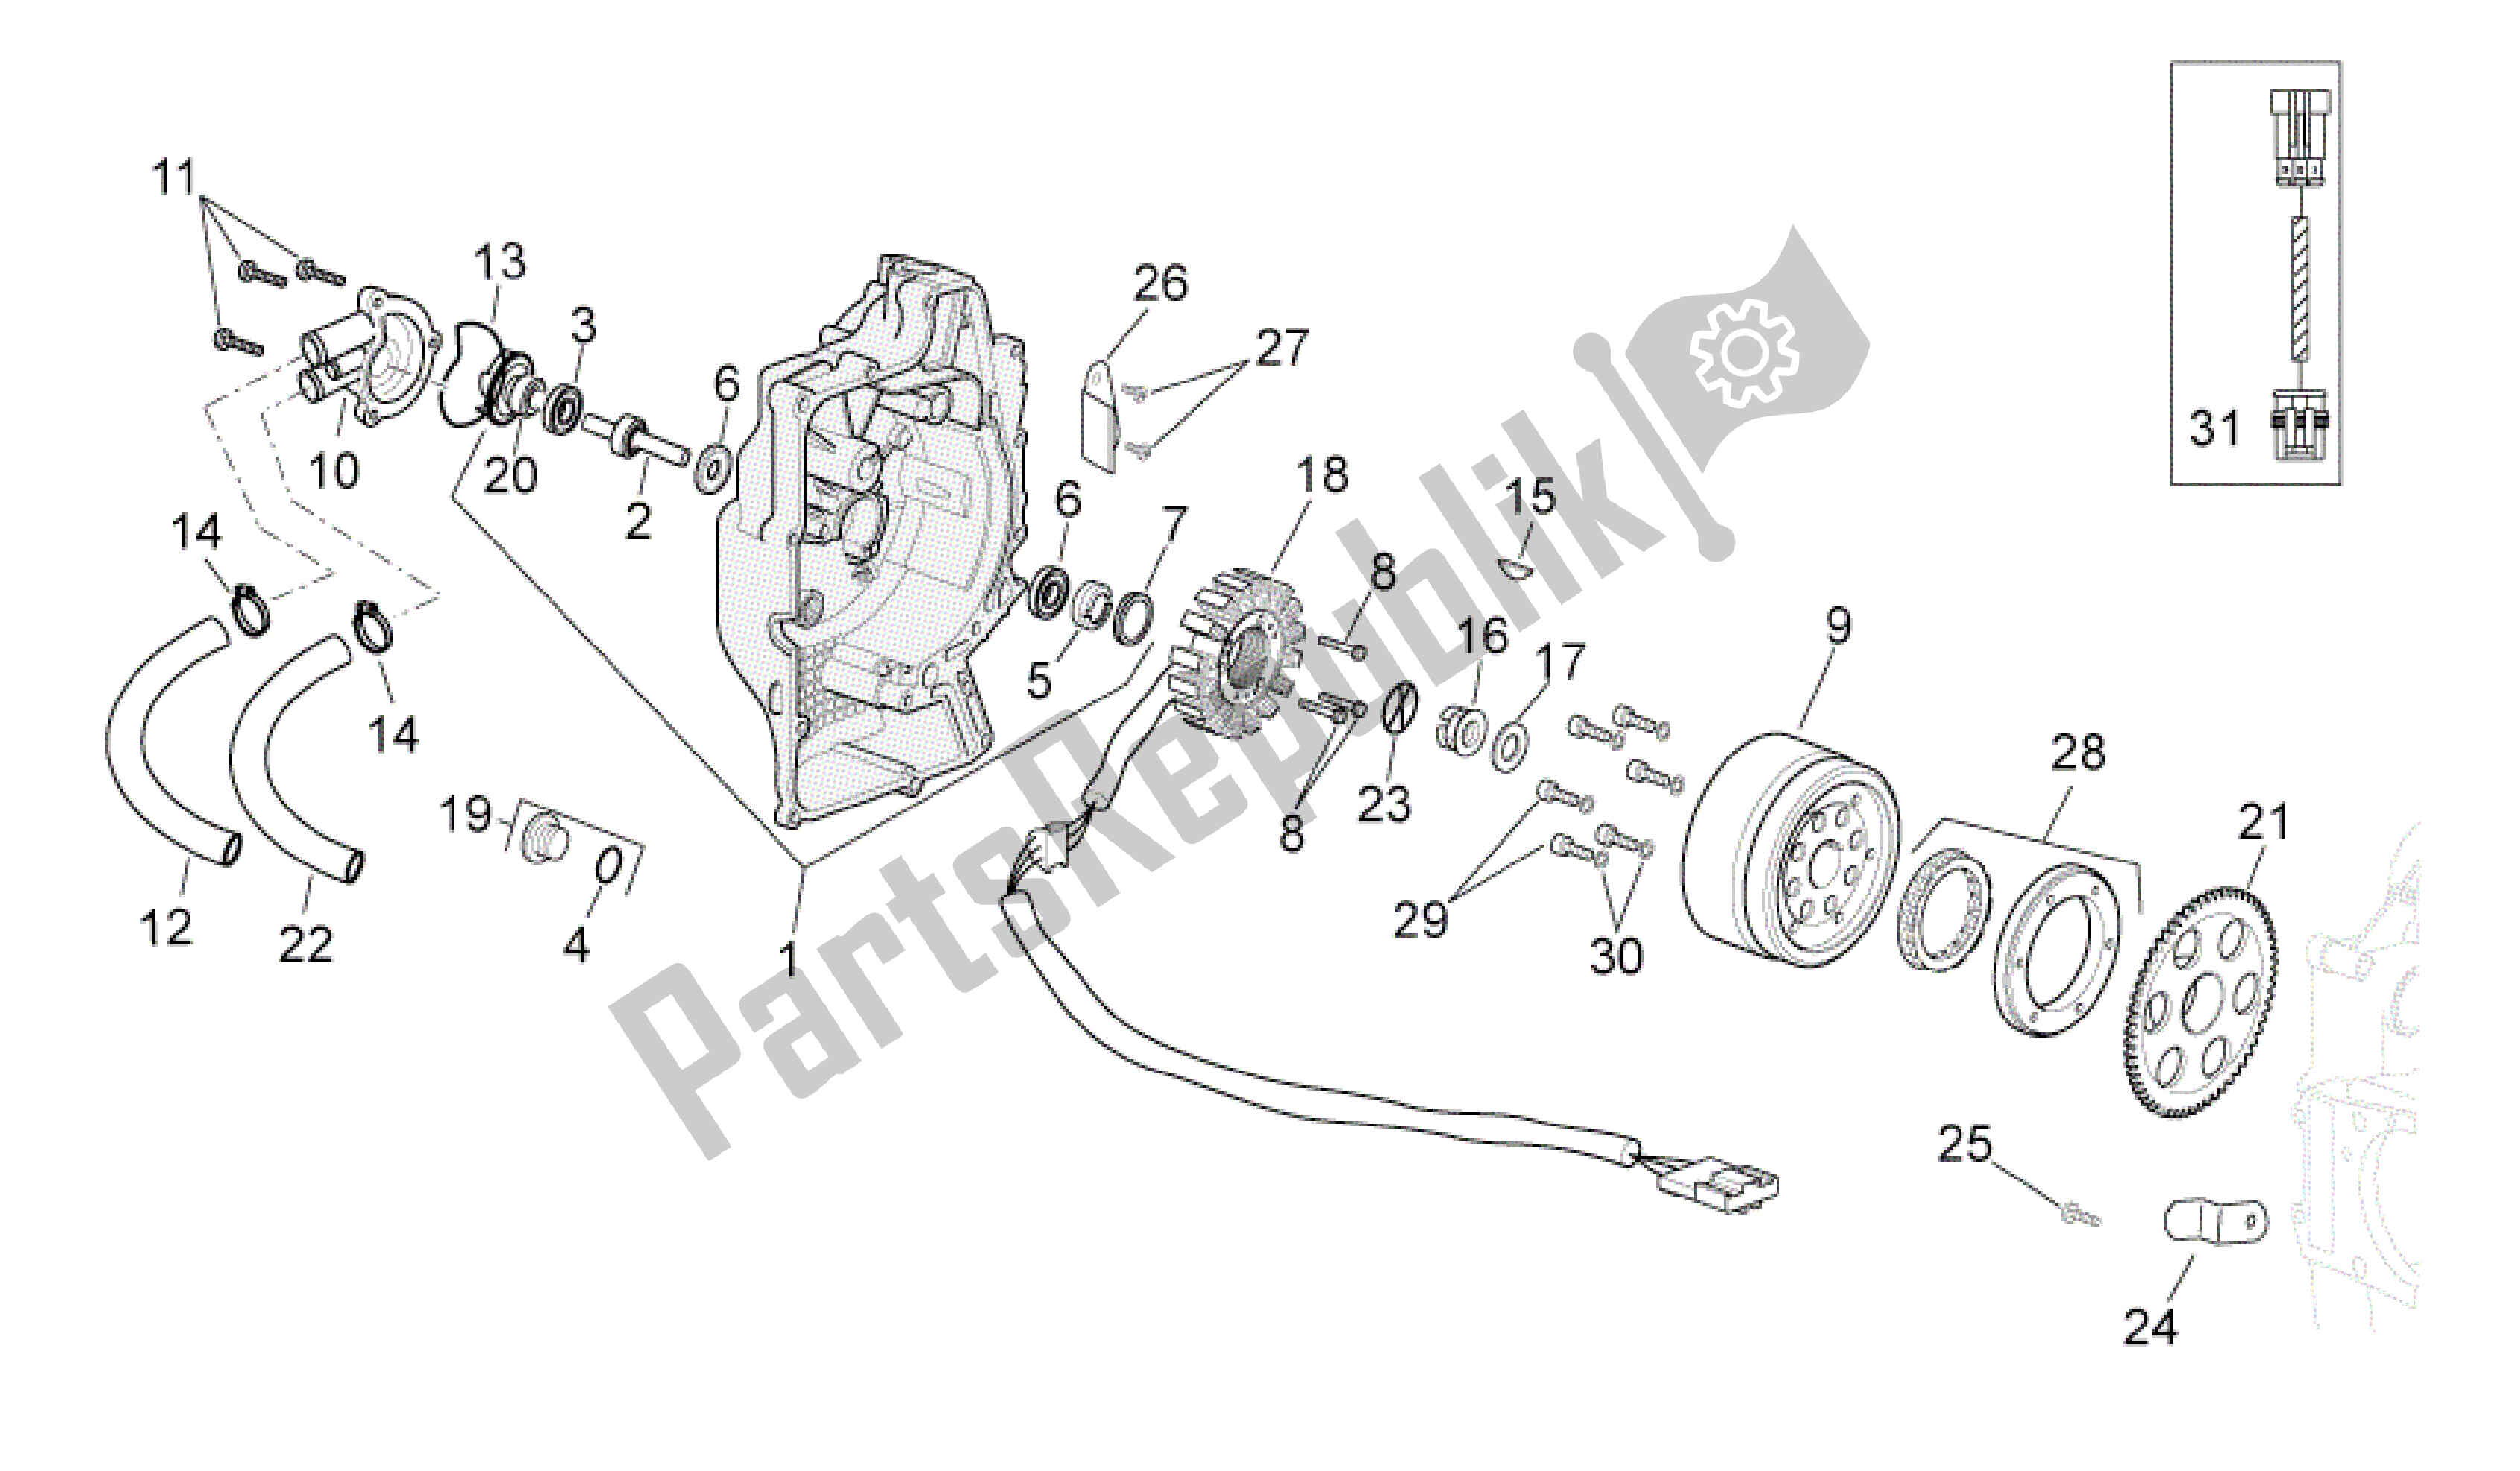 All parts for the Ignition Unit of the Aprilia Sport City 250 2008 - 2010